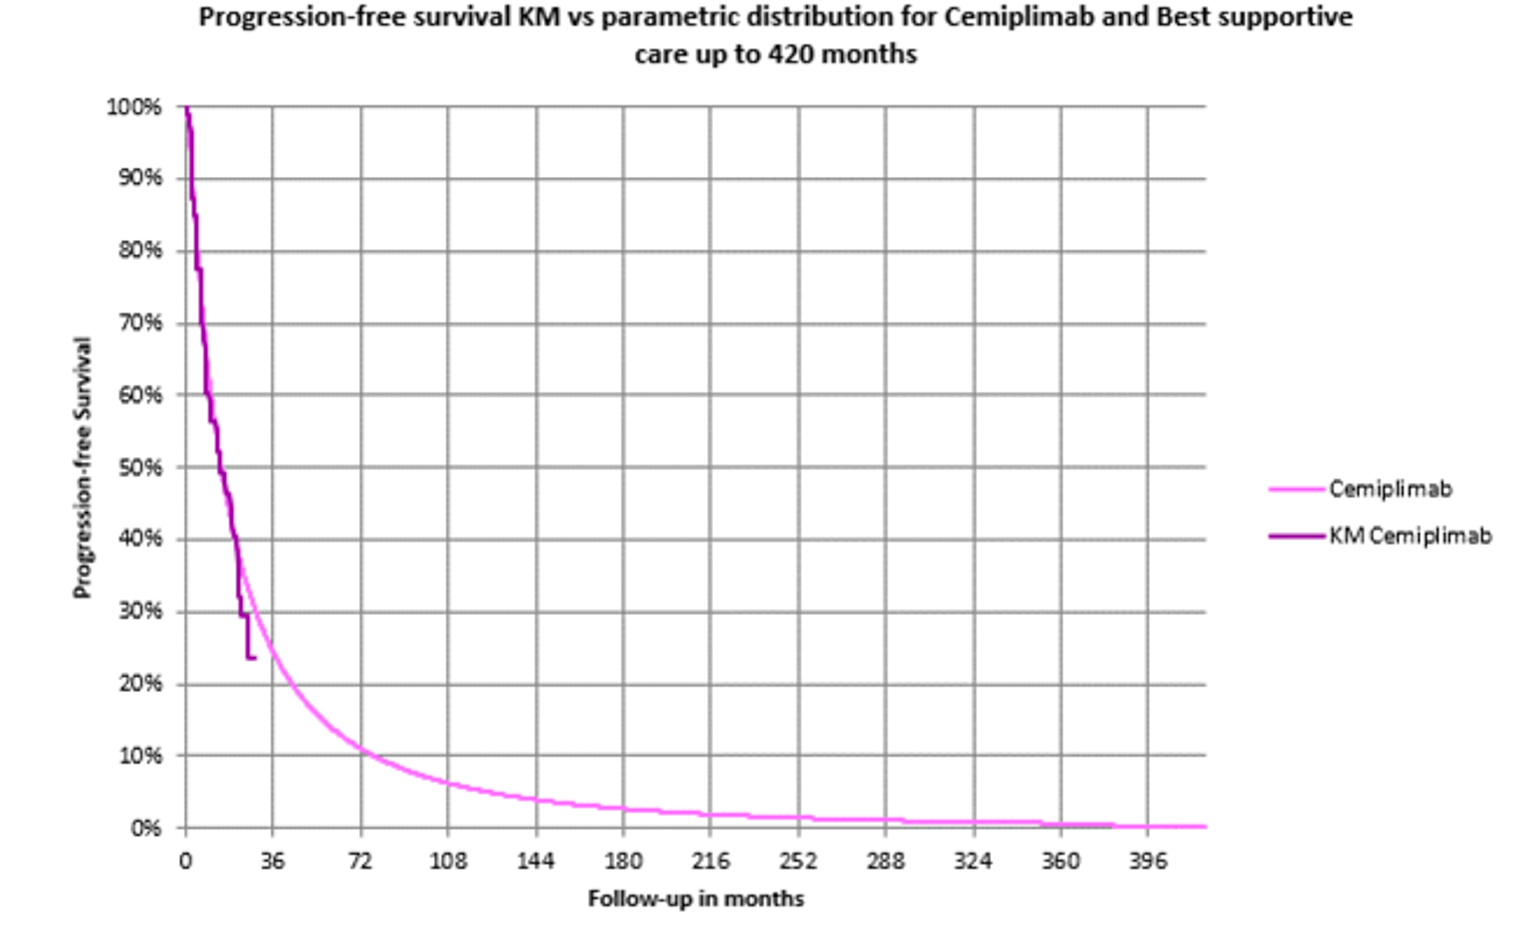 This graph shows the 1 KM curve for PFS of cemiplimab. The KM curve for cemiplimab is based on Study 1620 (n = 84, mean age=69). A survival curve was fitted to the KM and used to extrapolated PFS beyond the trial period.